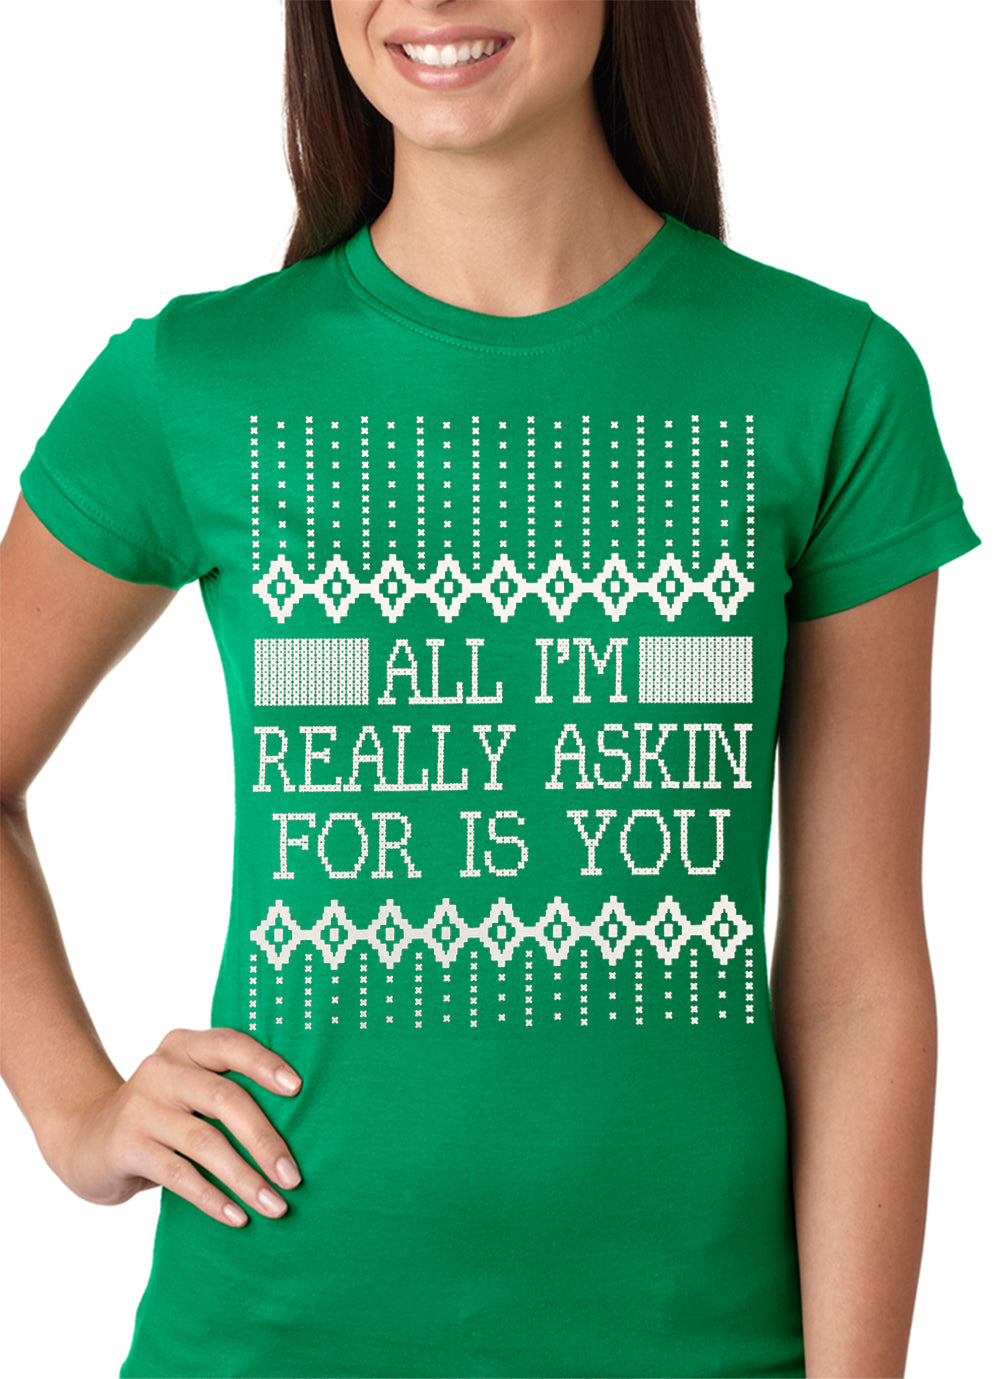 All I'm Asking For is You Girls T-shirt Kelly Green